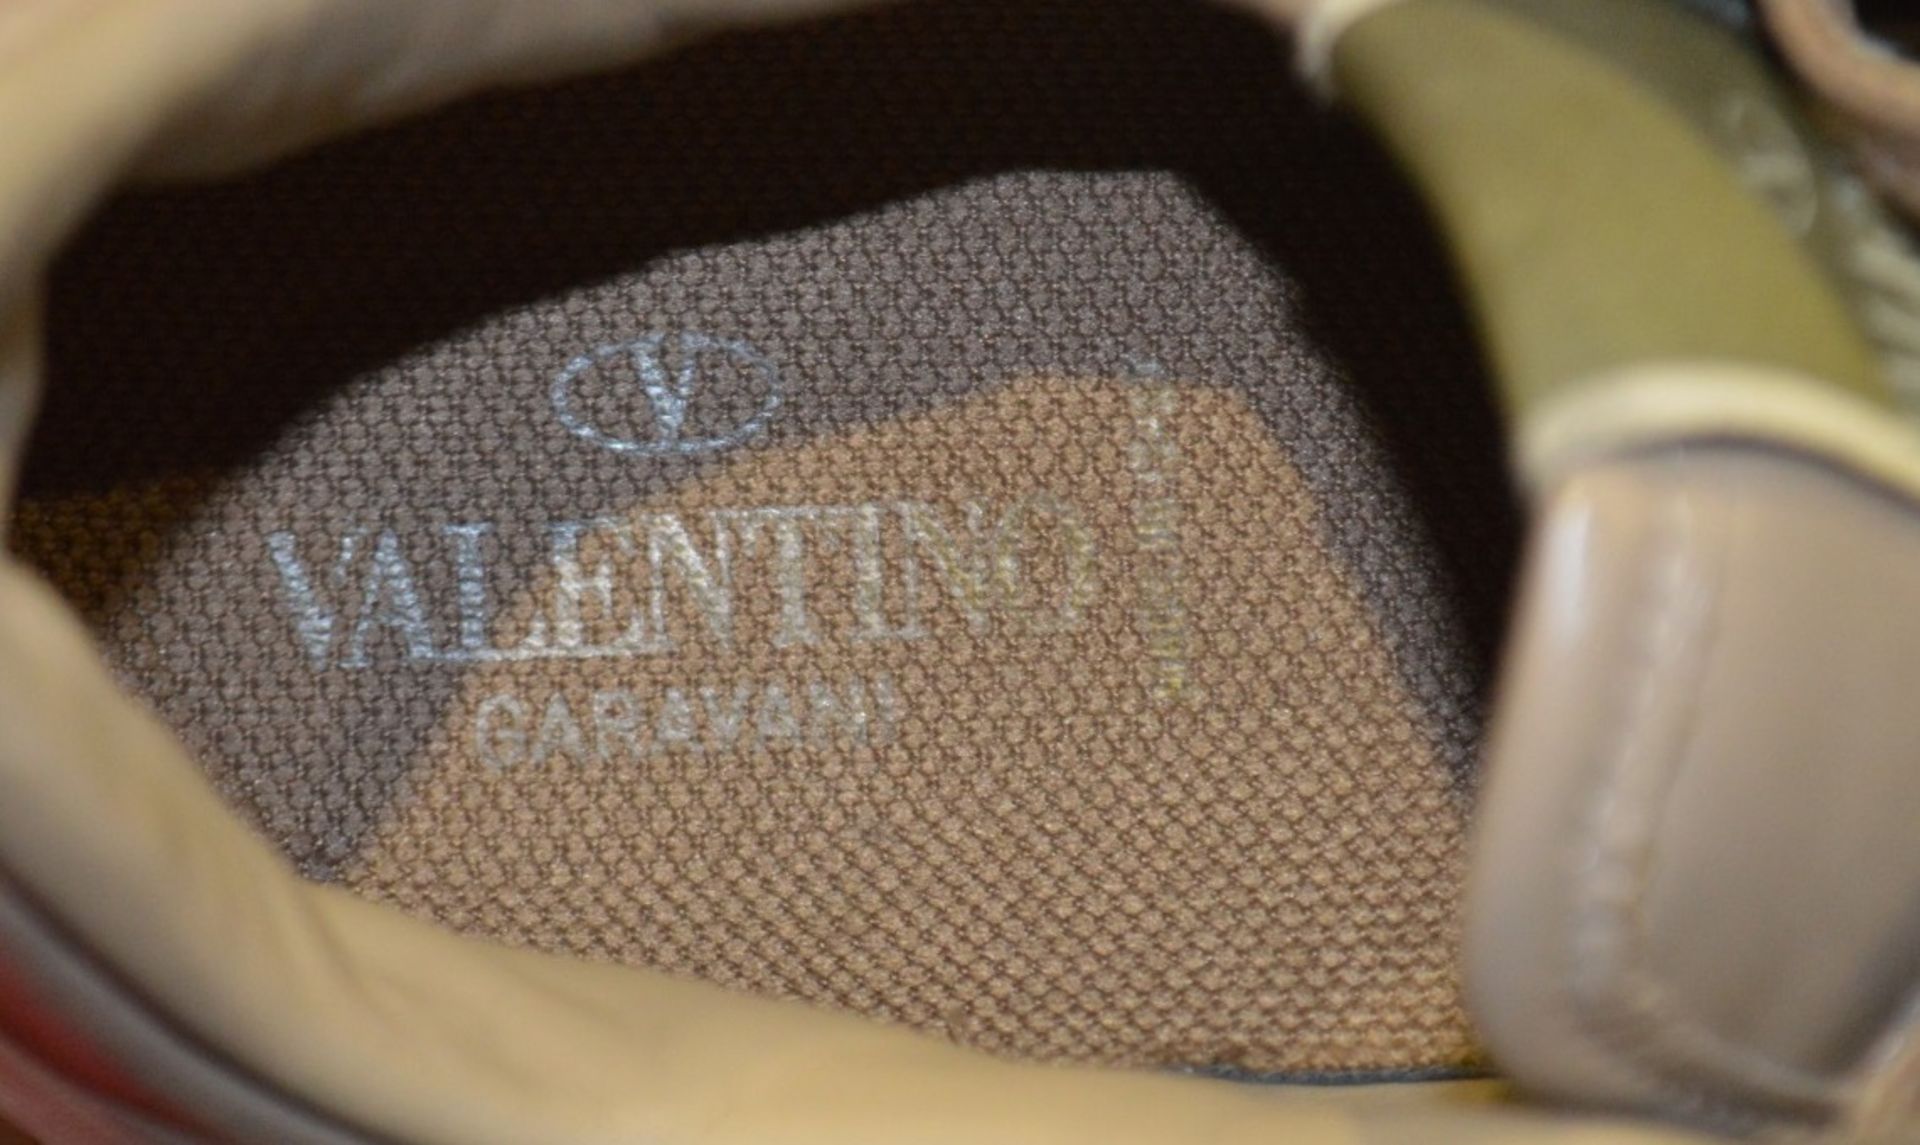 1 x Pair Of Men's Genuine Valentino Trainers In Beige - Size: 42 - Preowned In Very Good Condition - - Image 2 of 7